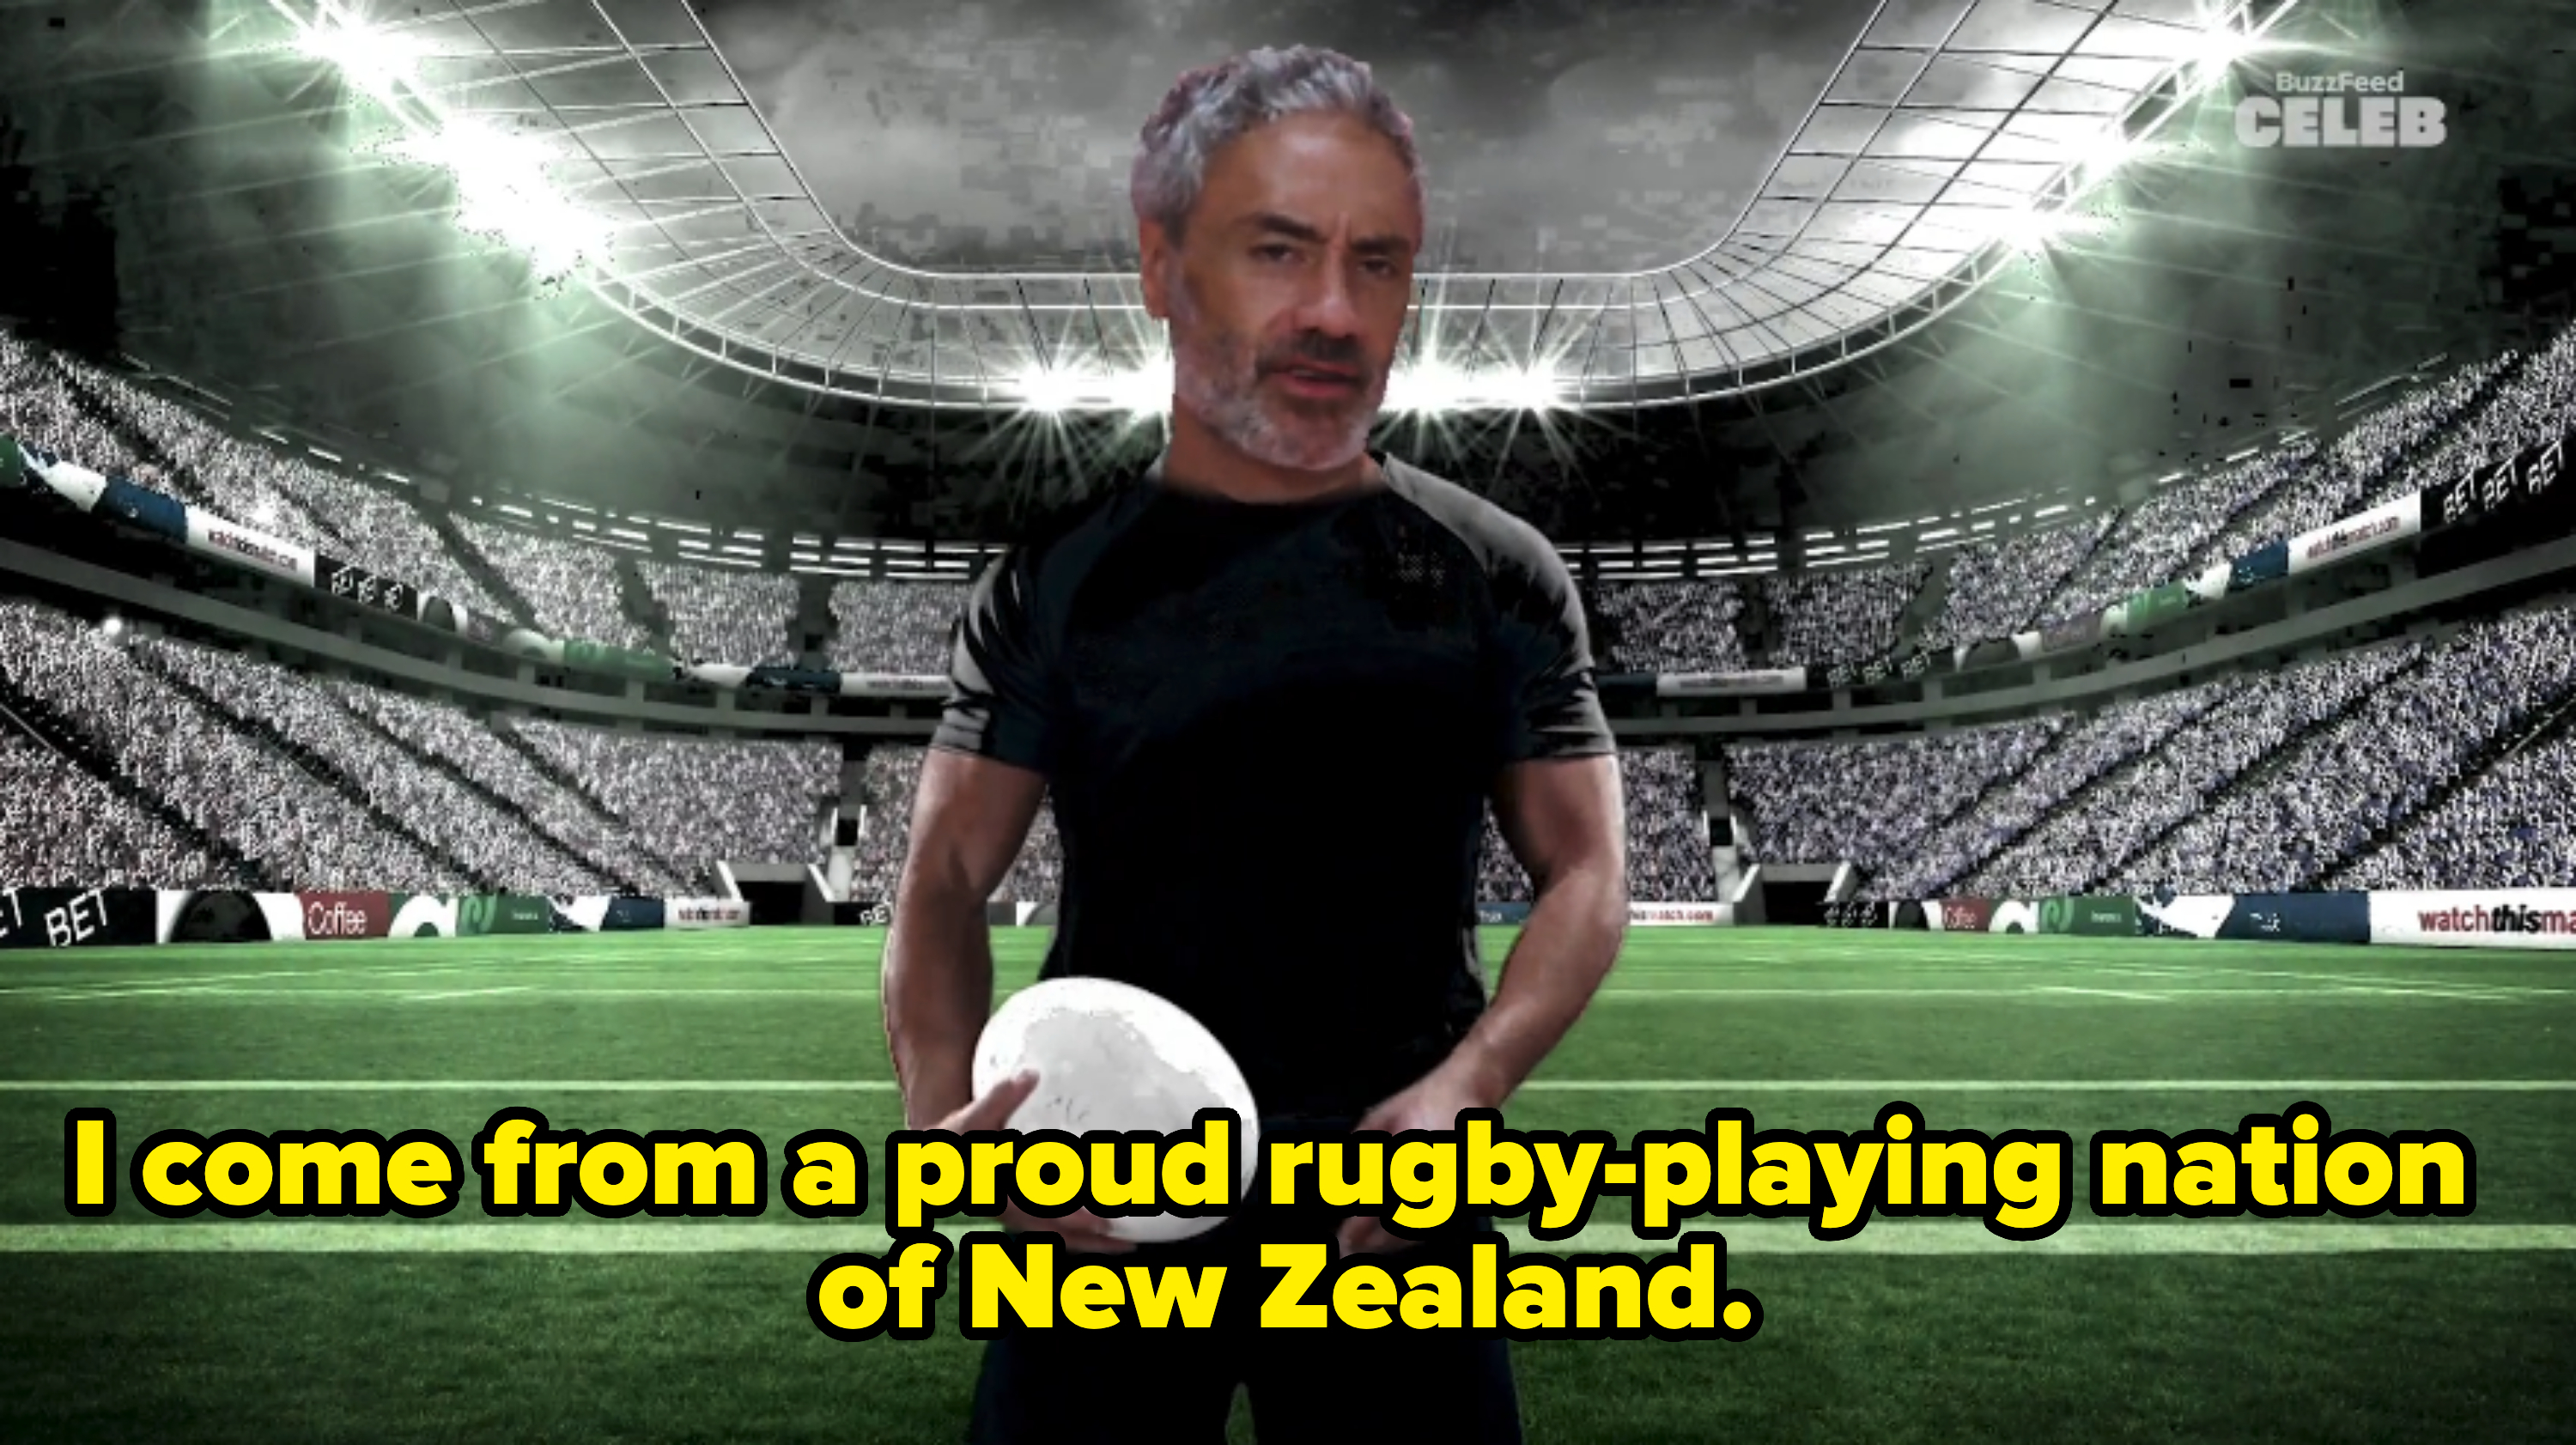 &quot;I come from a proud rugby-playing nation of New Zealand&quot;